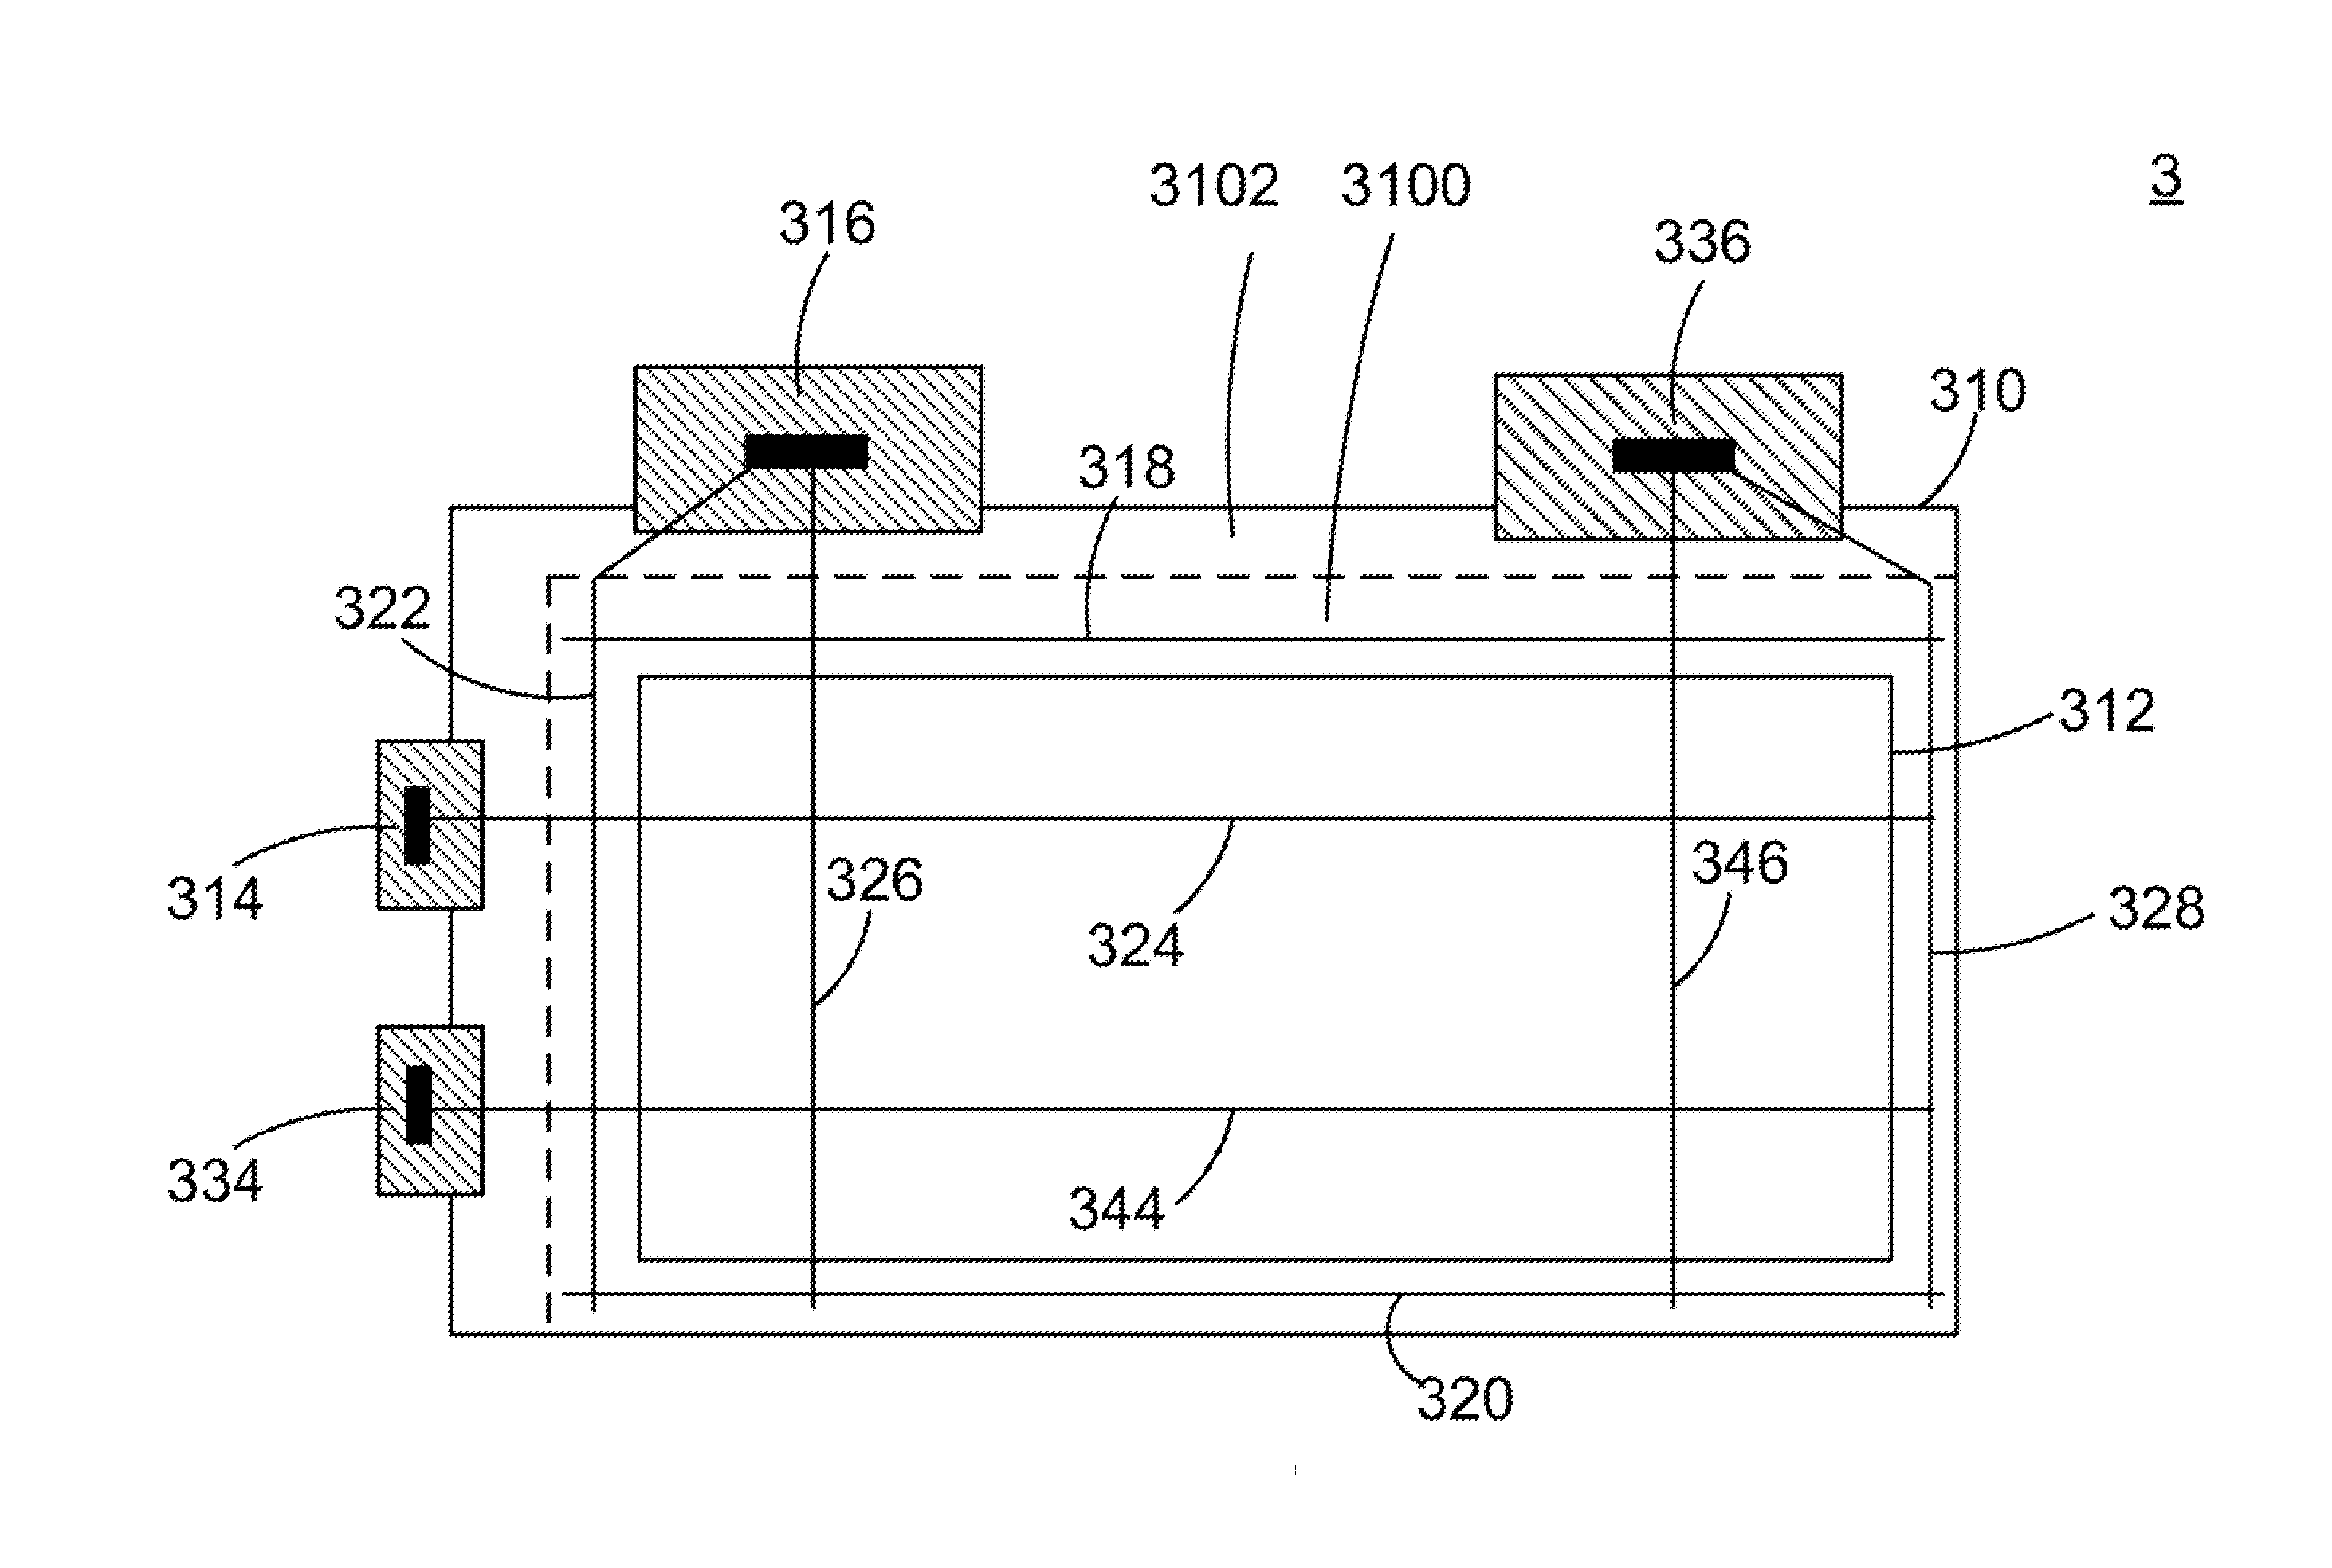 Display device and repairing method for the same